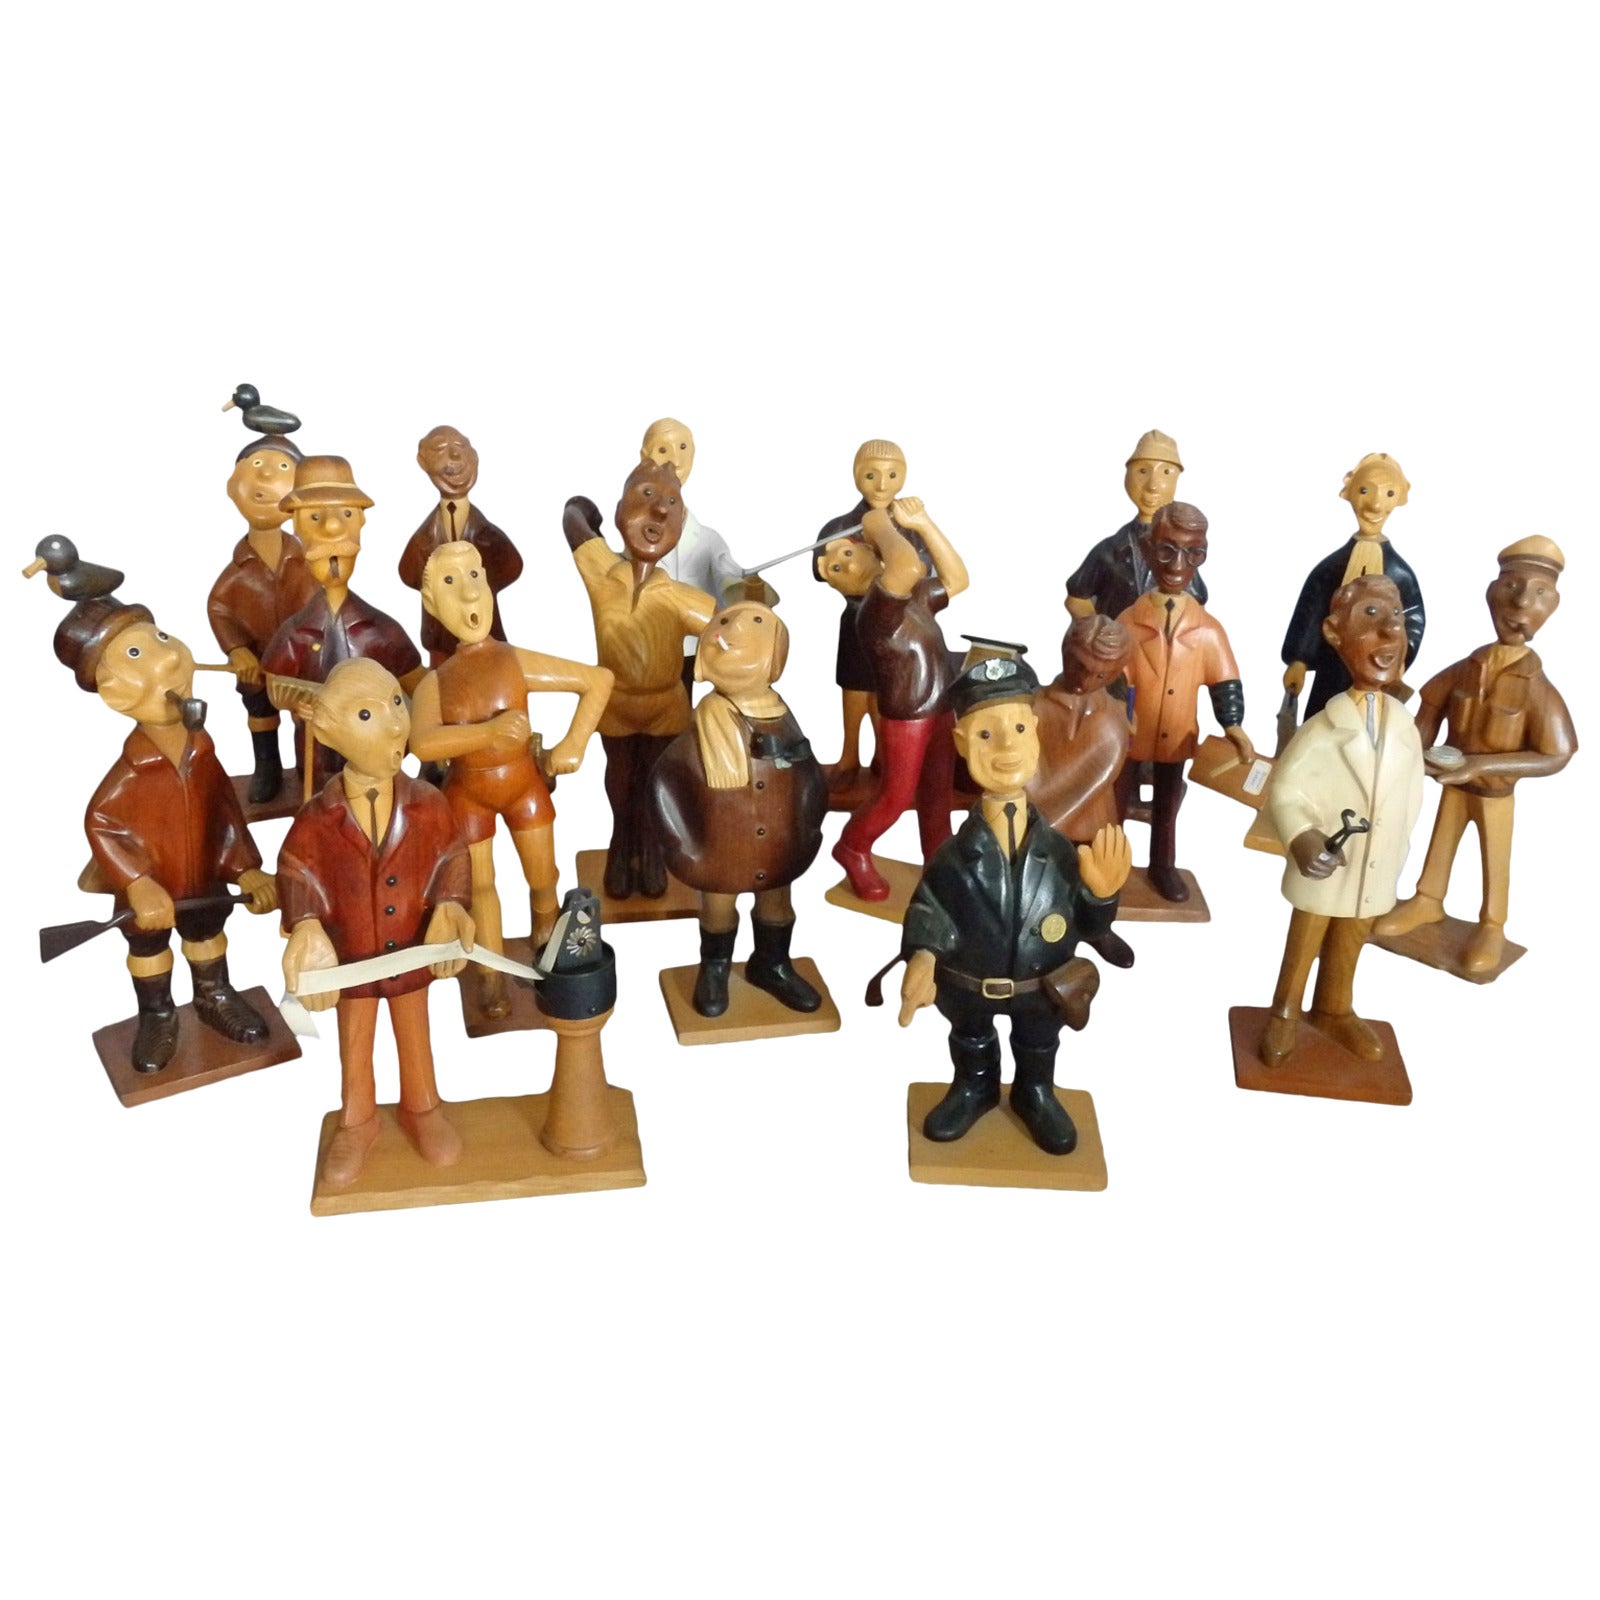 Collection of Whimsical Carved Wood Village People